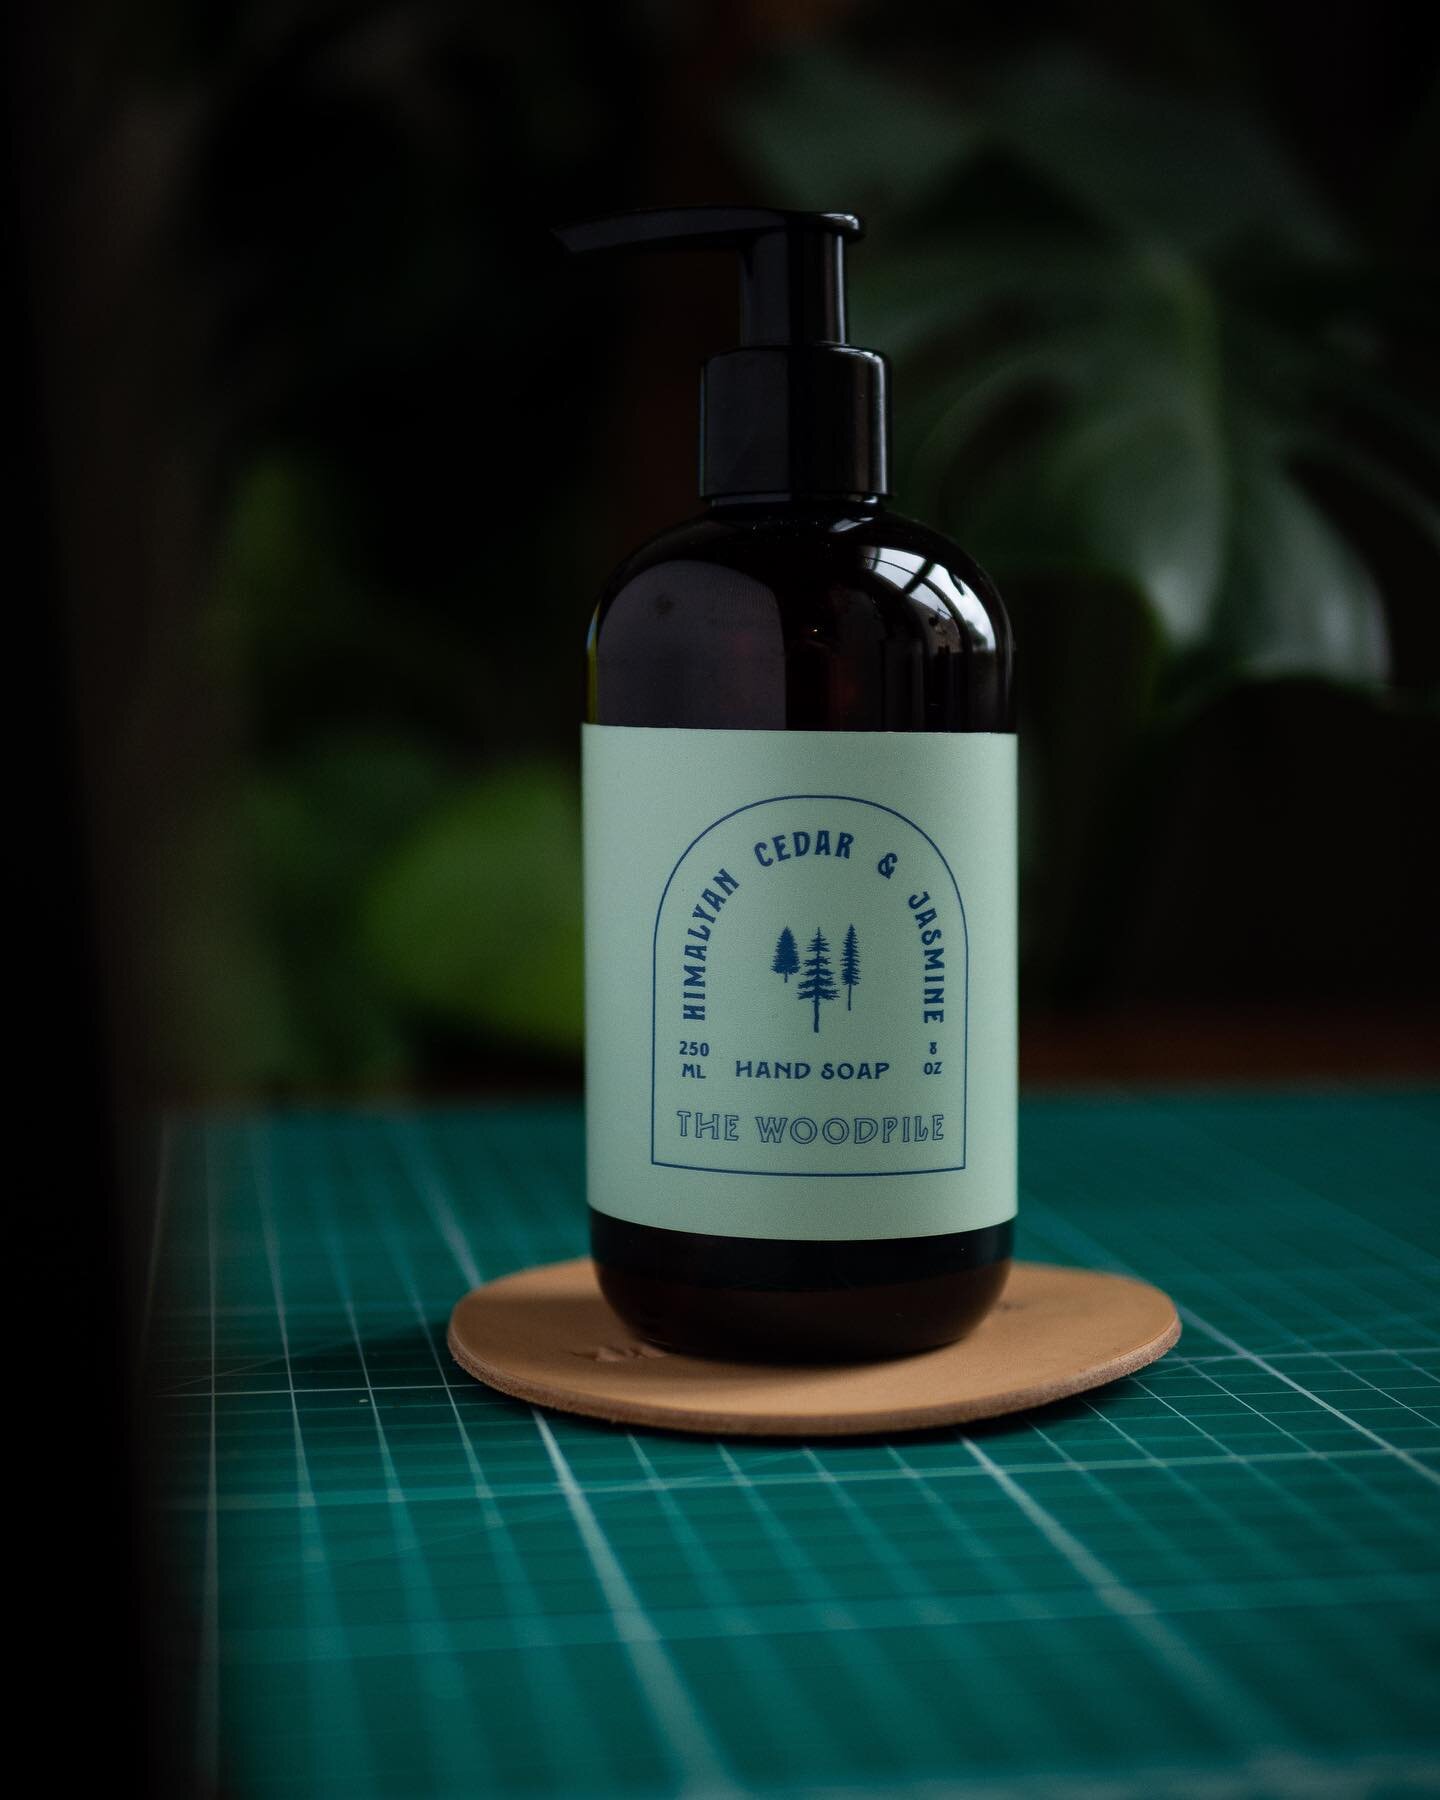 This hand soap has been a real hit with everyone who tested it out so we&rsquo;ve decided to go ahead and launch it as the newest product. Everyone has loved the long lasting smell from this jasmine and Himalayan cedar soap. Available on the website 